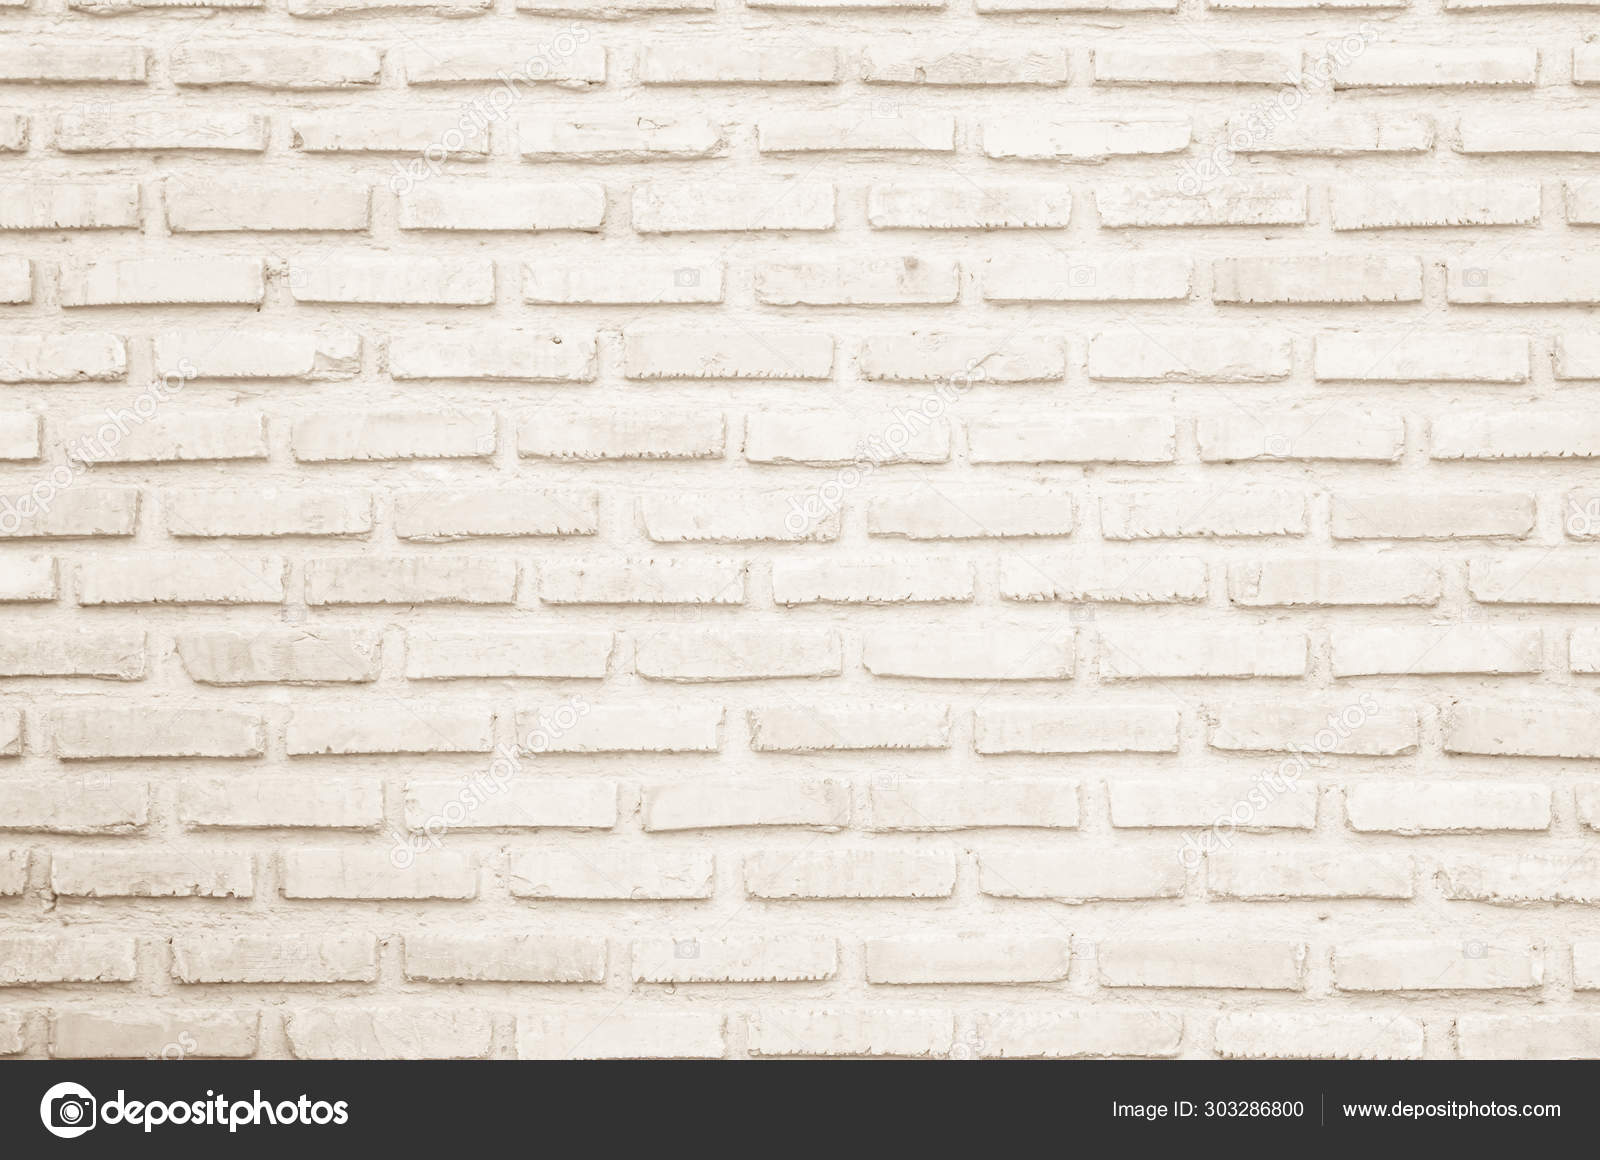 Wall Cream Brick Wall Texture Background In Room At Subway